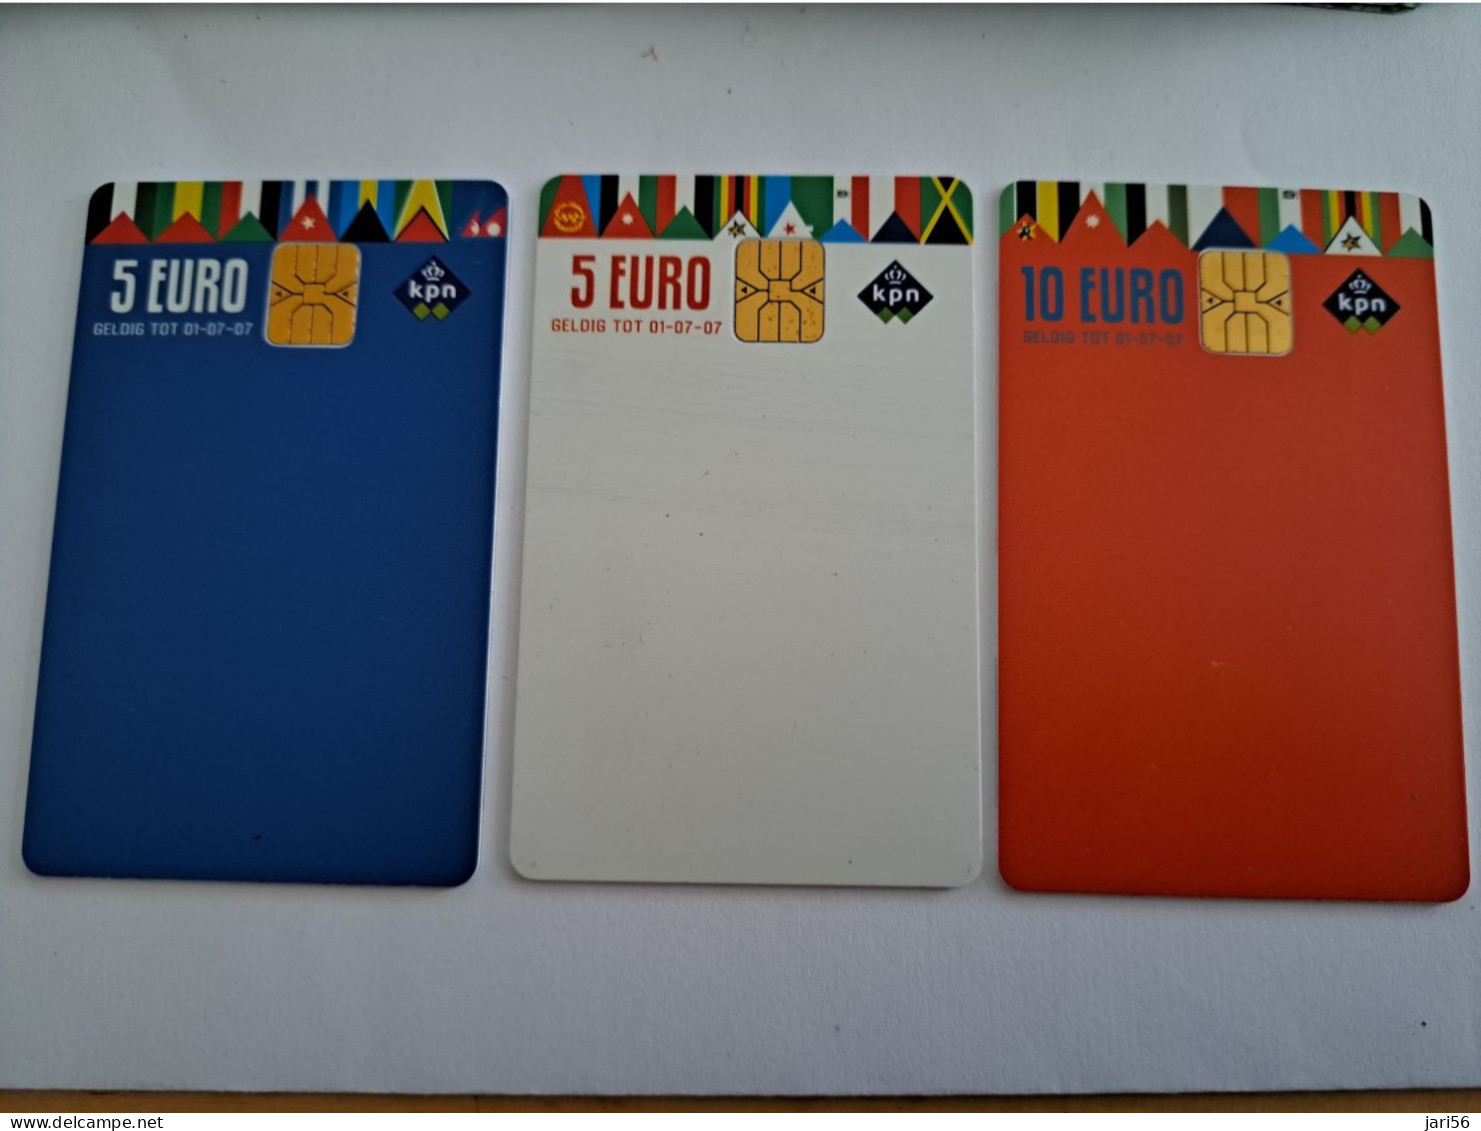 NETHERLANDS CHIPCARD  2X CARD  5 EURO / 1X 10 EURO /  FLAGS OF MANY COUNTRYS     /  USED   Cards  ** 15735 ** - Public